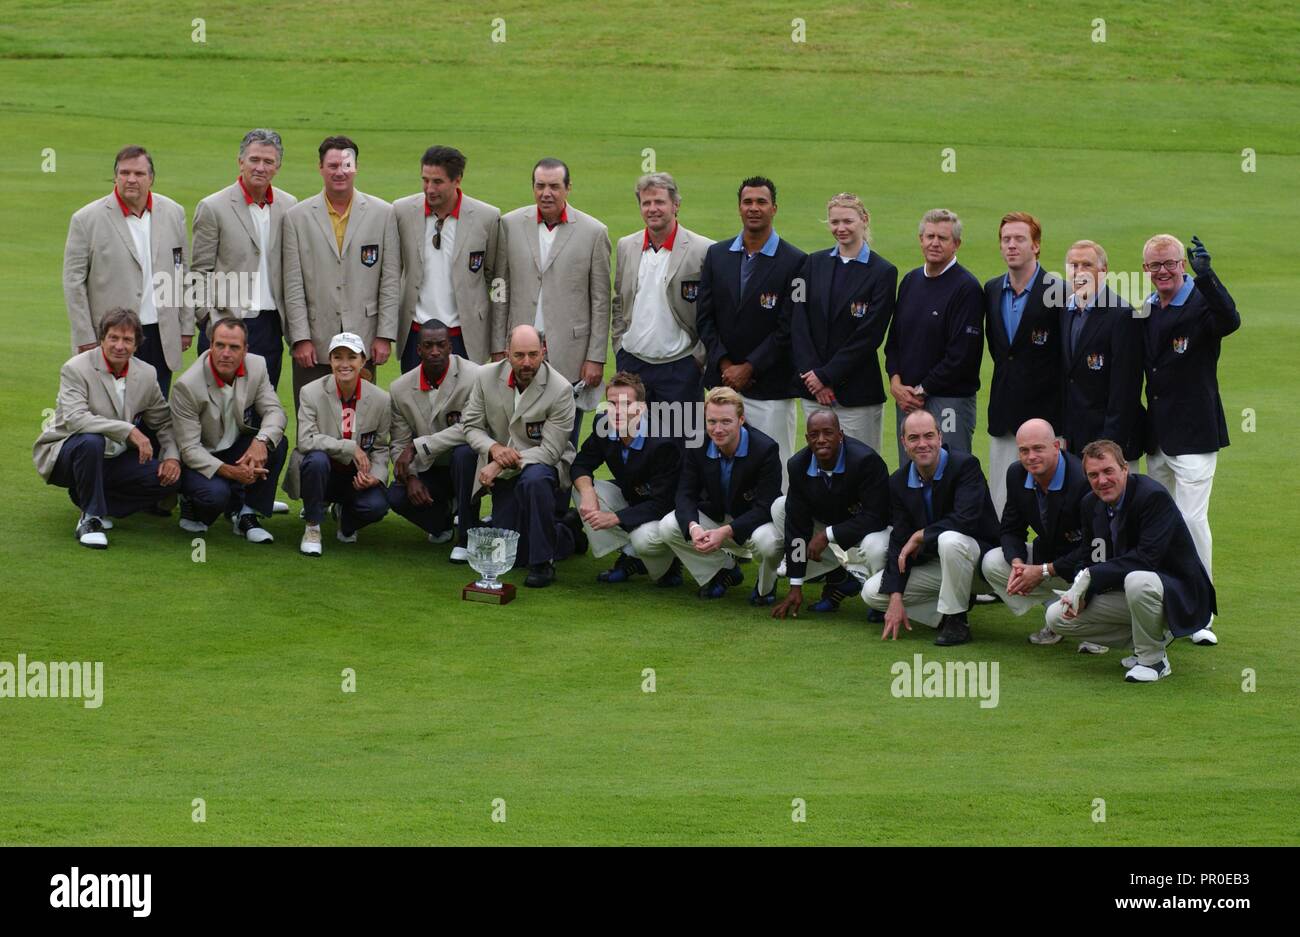 The All*Star Cup Celebrity Golf Tournament gets under way at the Celtic Manor Resort, Newport, South Wales today ( Saturday 26/8/06 ) with the American and European teams posing for team pictures before the start of the event. Stock Photo